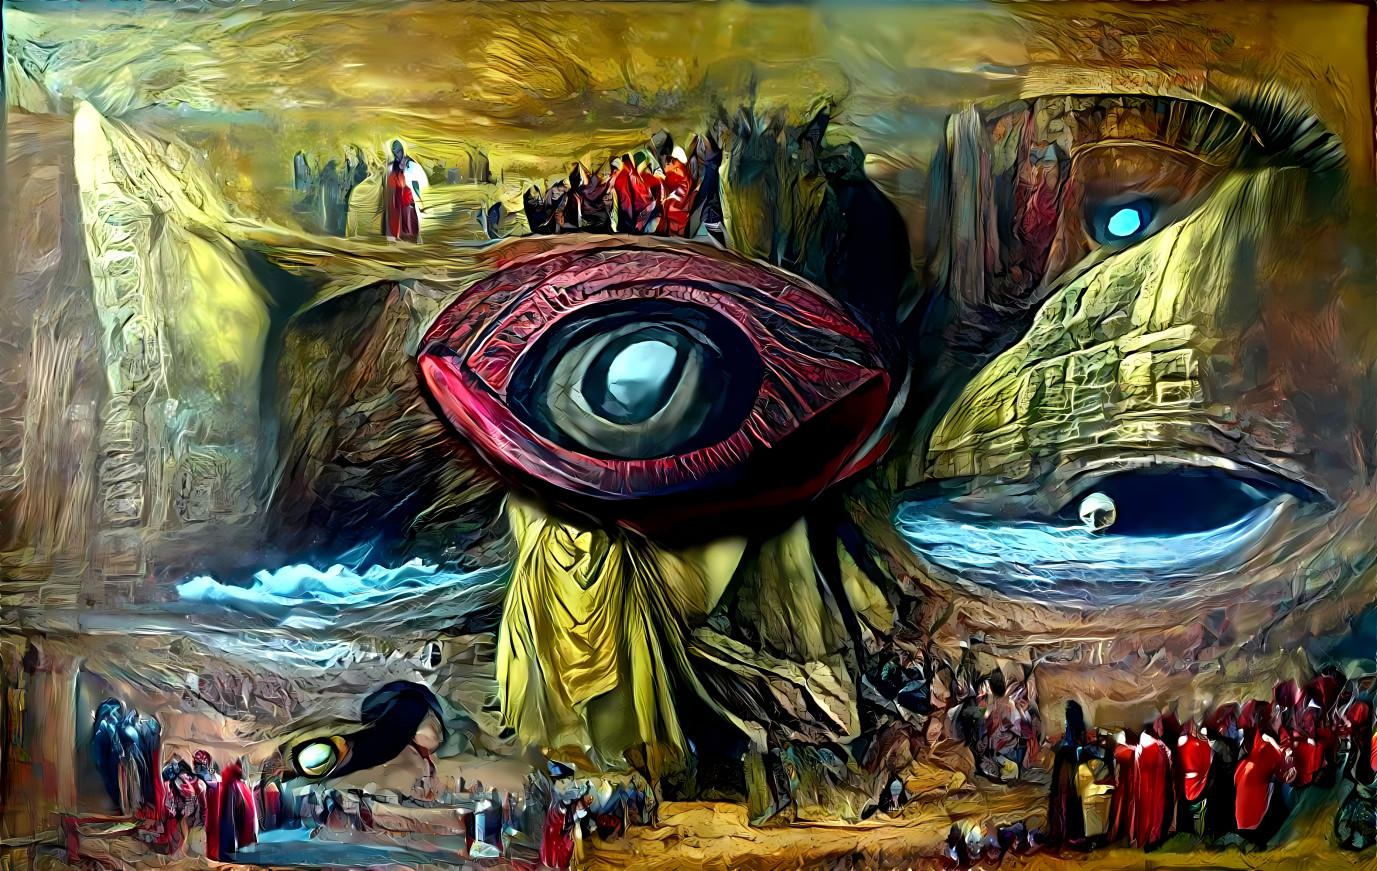 All worship the somewhat impressive eye sculpture